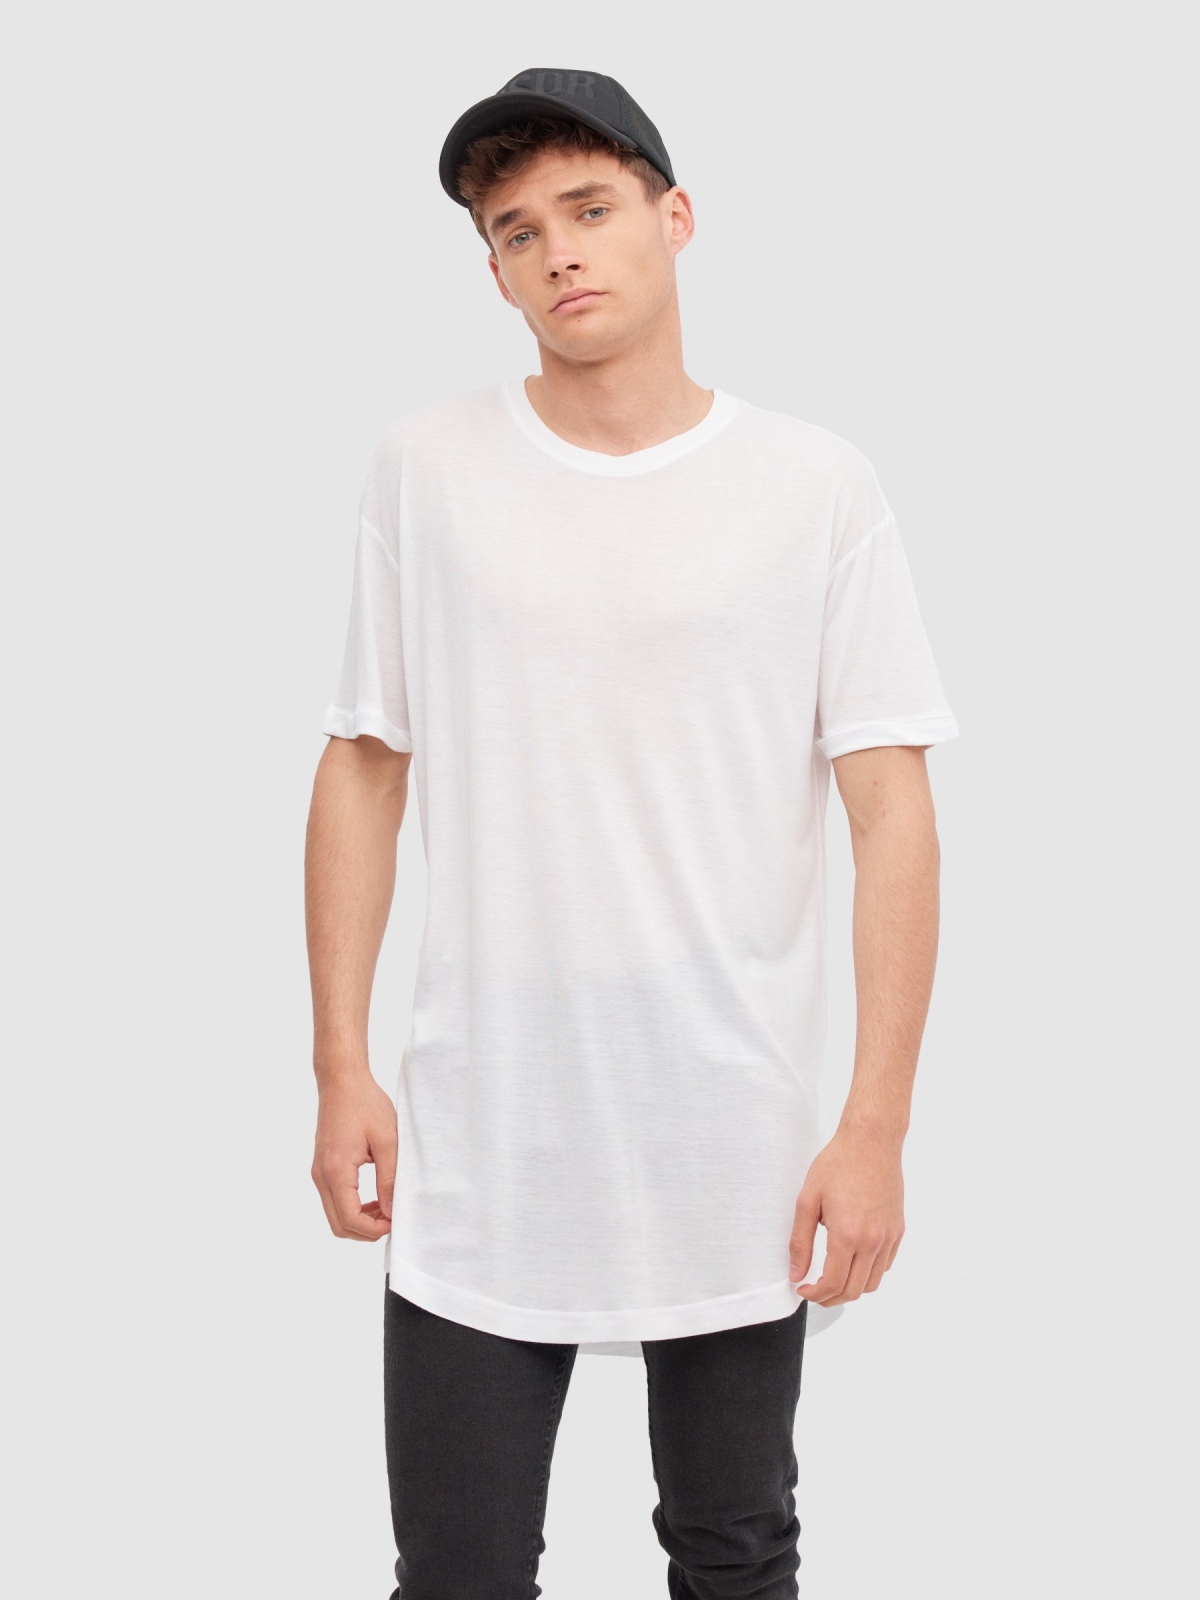 Long basic t-shirt white middle front view